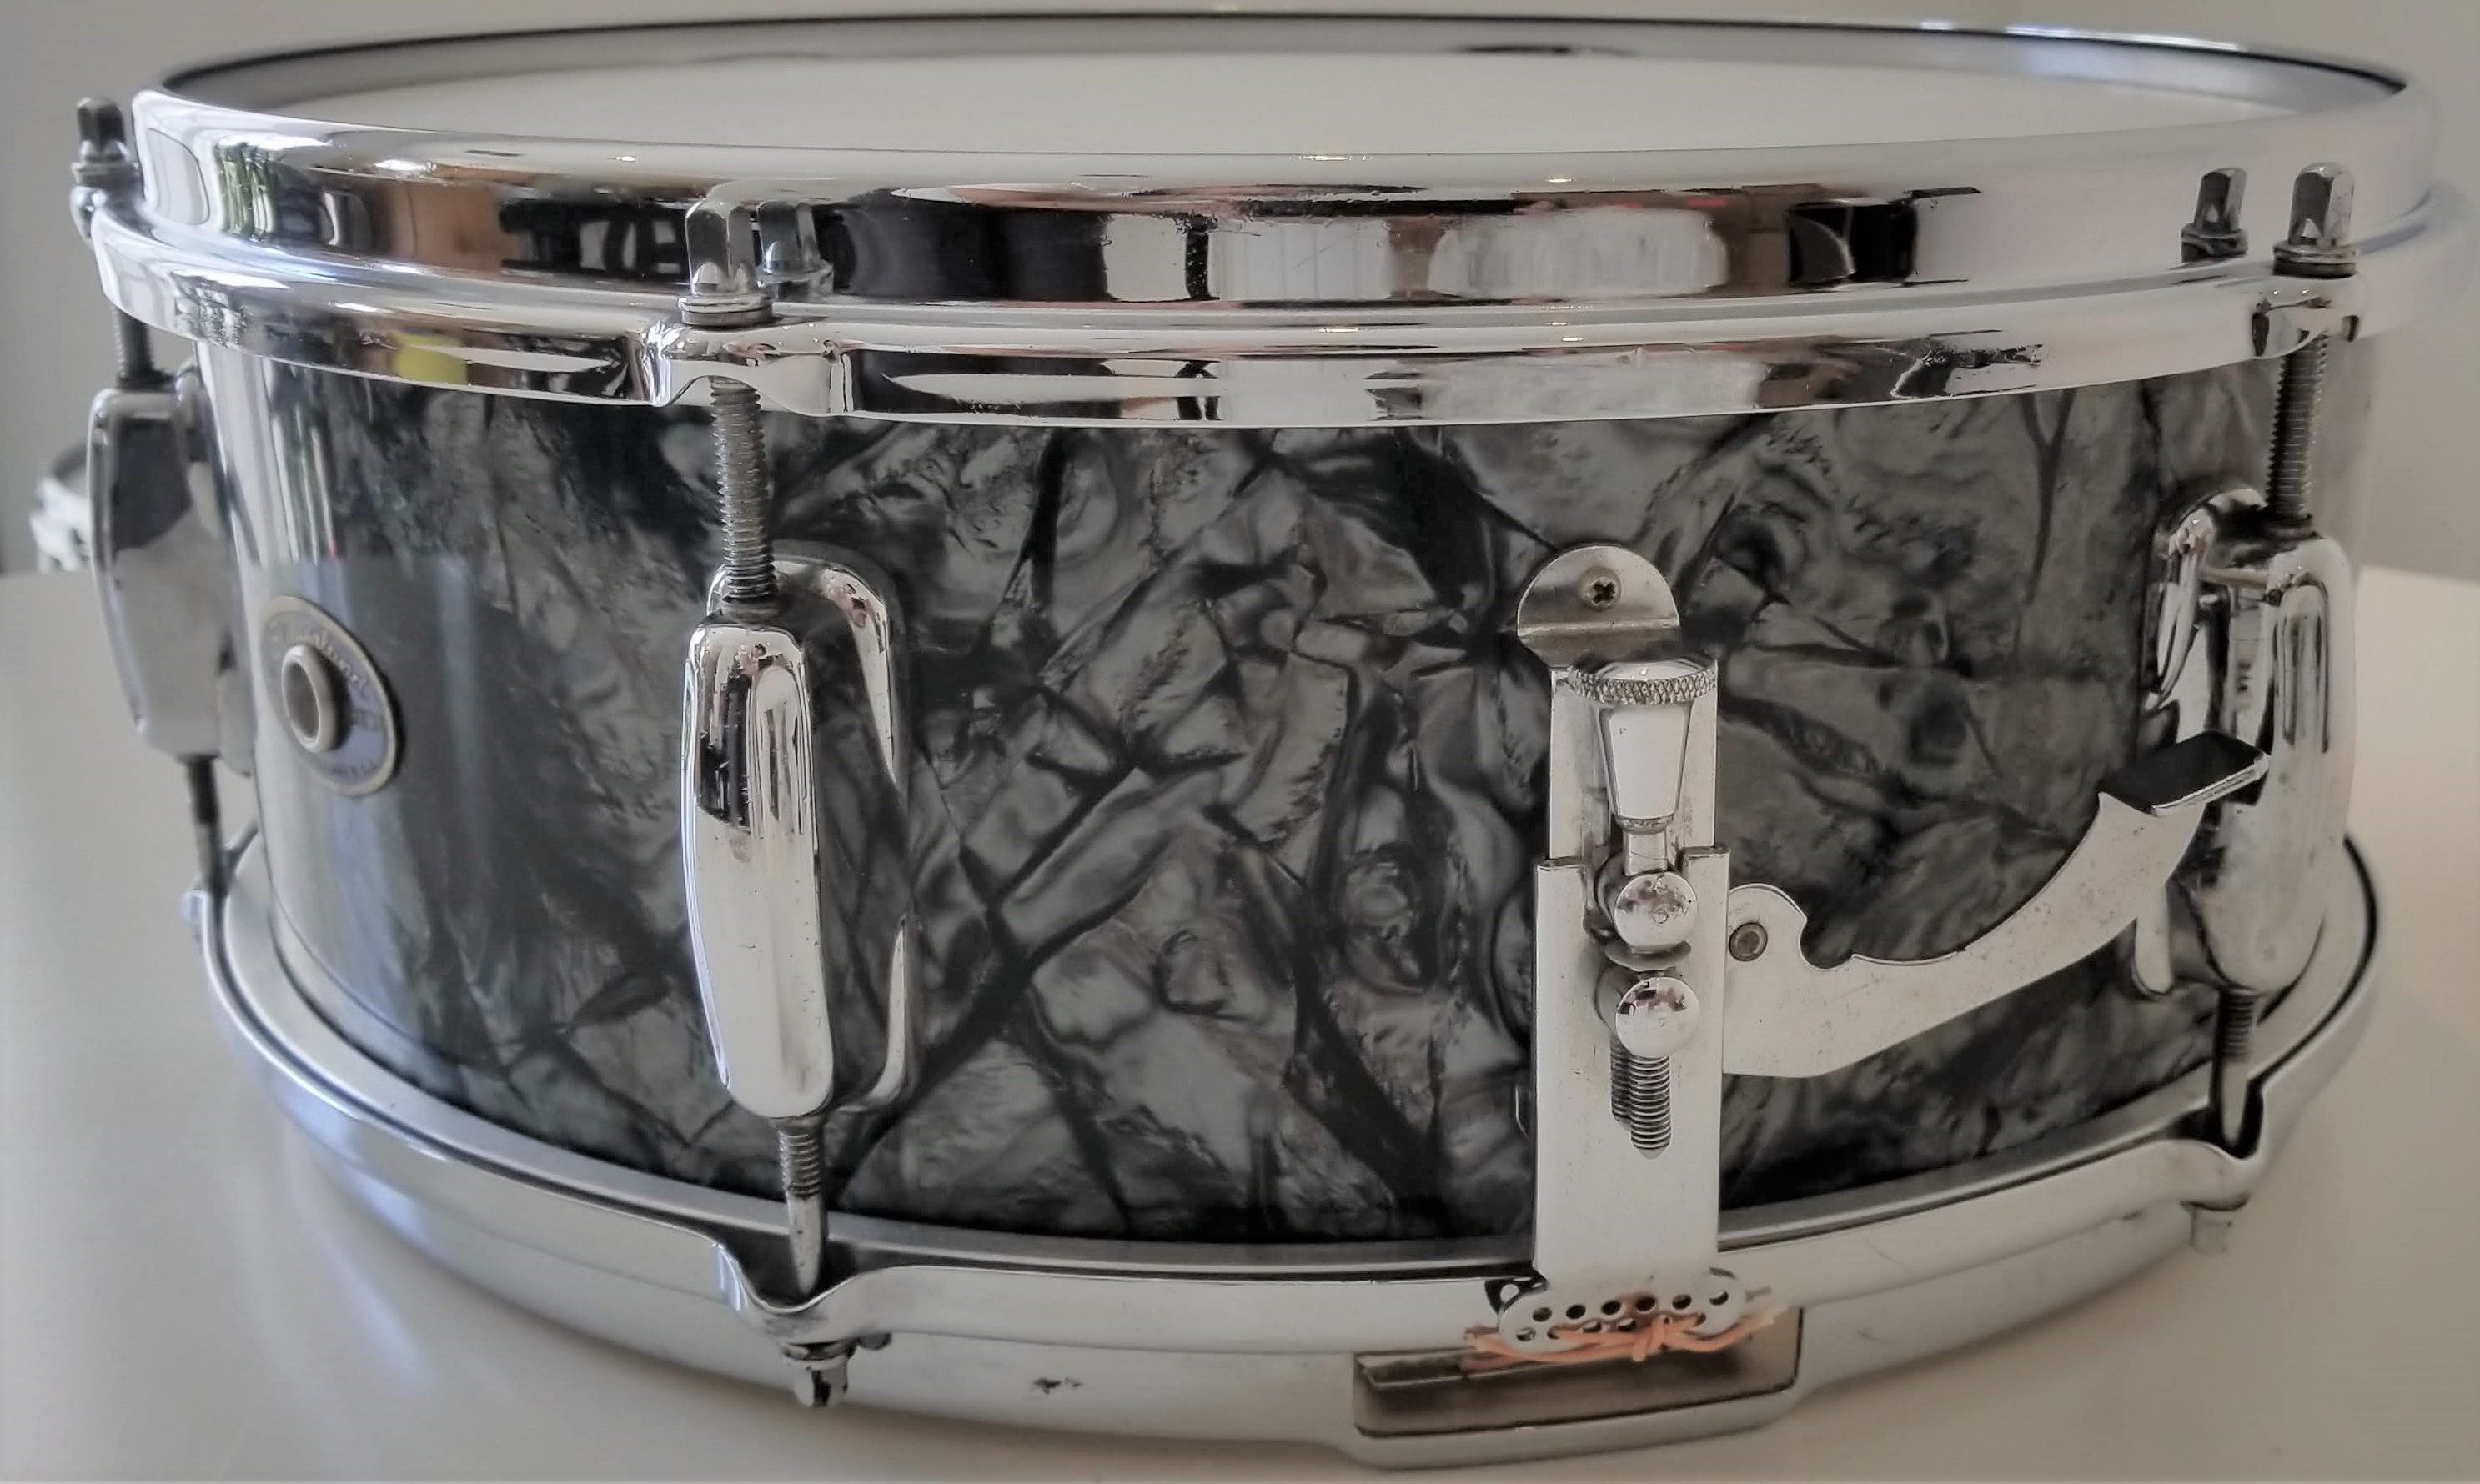 Slingerland Hollywood Ace 1962 Acoustic Snare, 5.5"x14" Black Diamond Pearl Finish -Very Good Condition